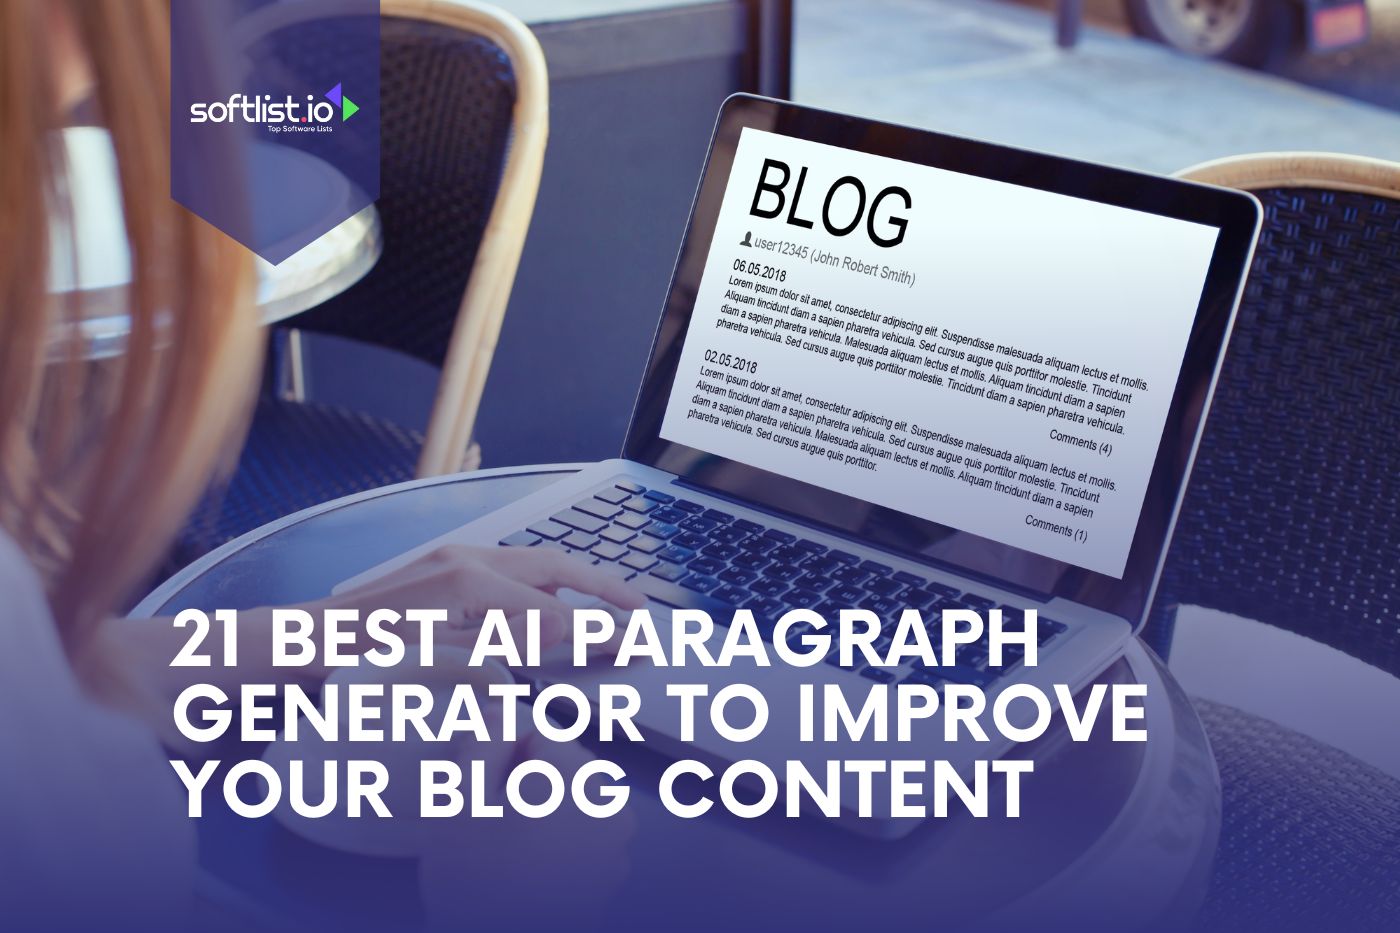 21 Best AI Paragraph Generator To Improve Your Blog Content